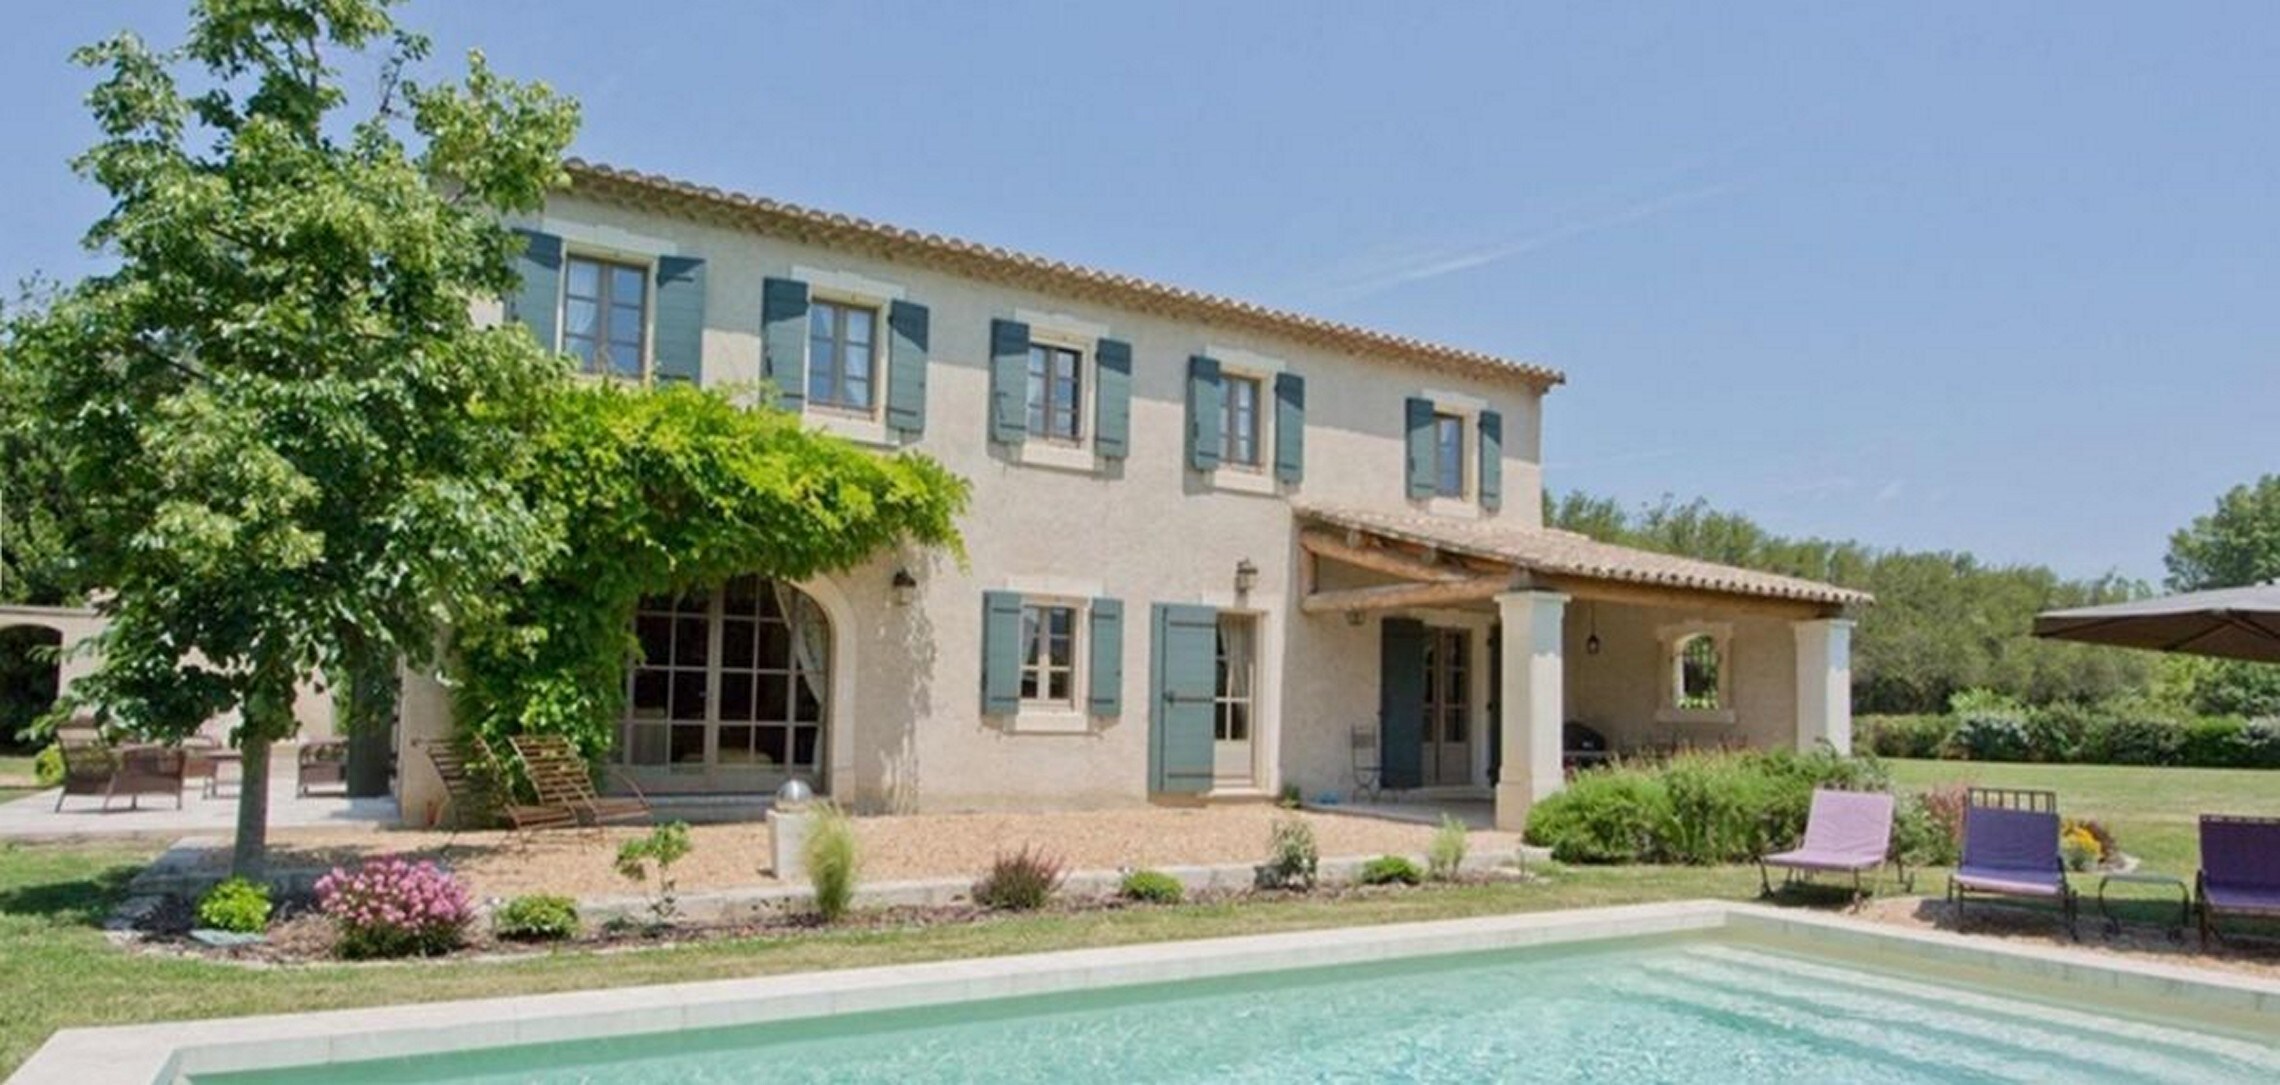 Property Image 1 - Lovely spacious 4-bedroom Provencal villa within walking distance of St Remy village centre